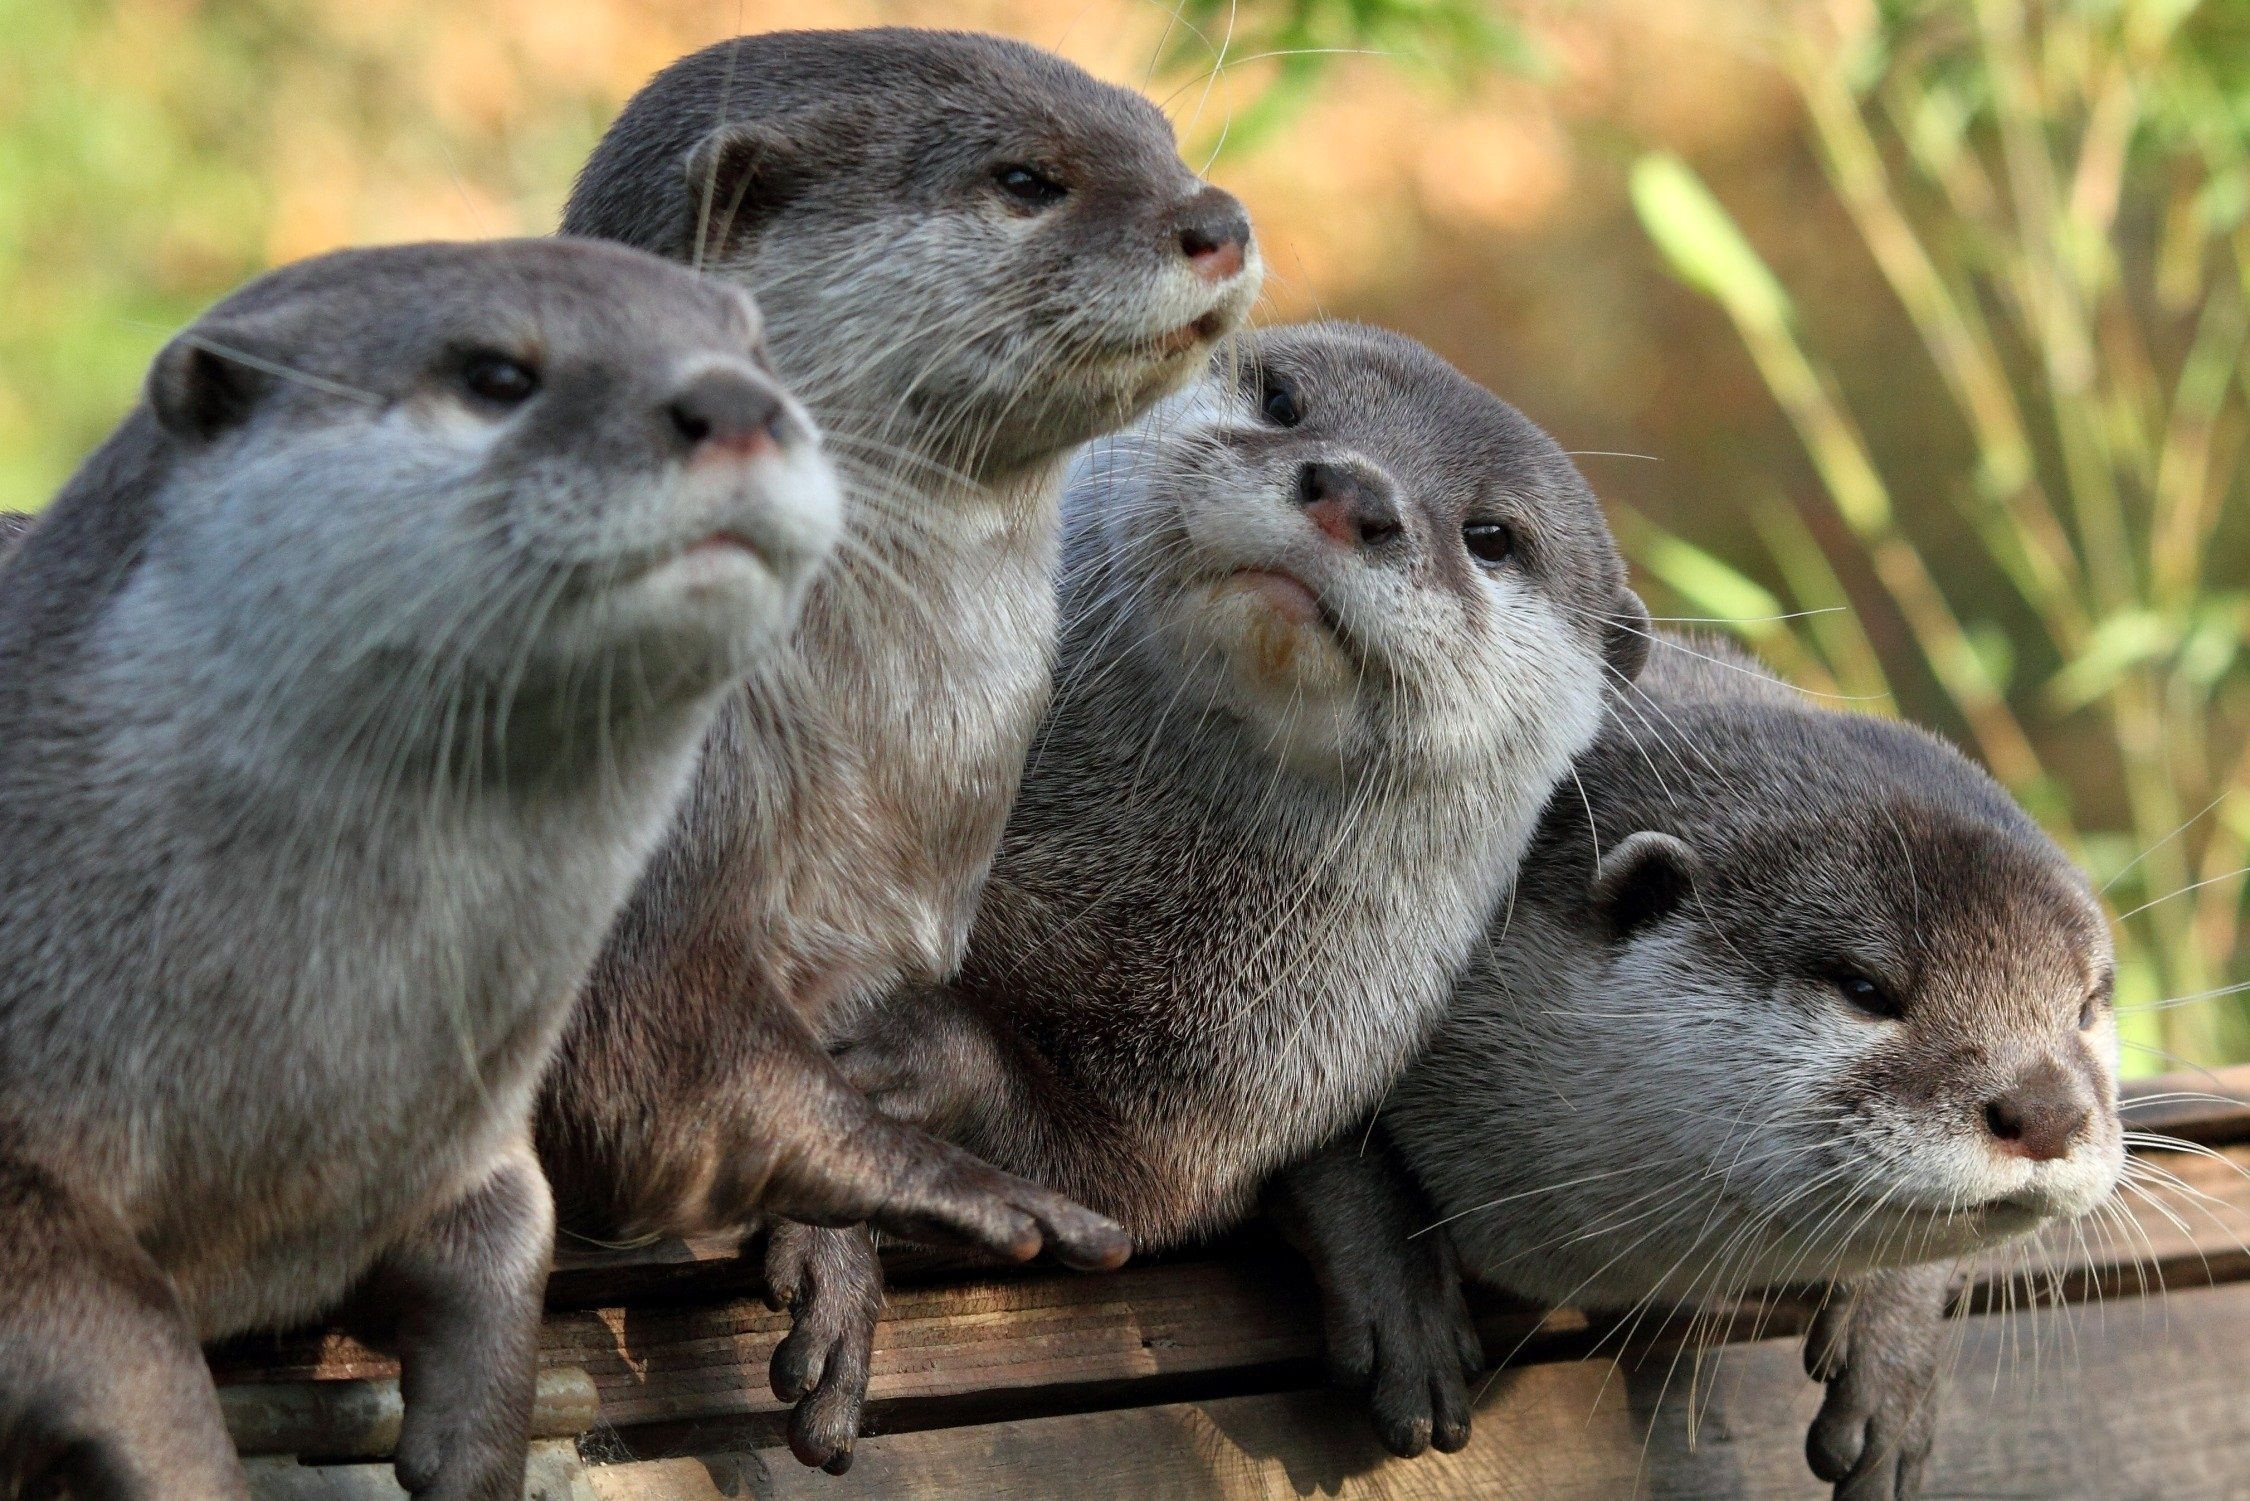 Stunning river otter wallpapers, Adorable otter facts, Cute and charismatic, Dive into their world, 2250x1510 HD Desktop